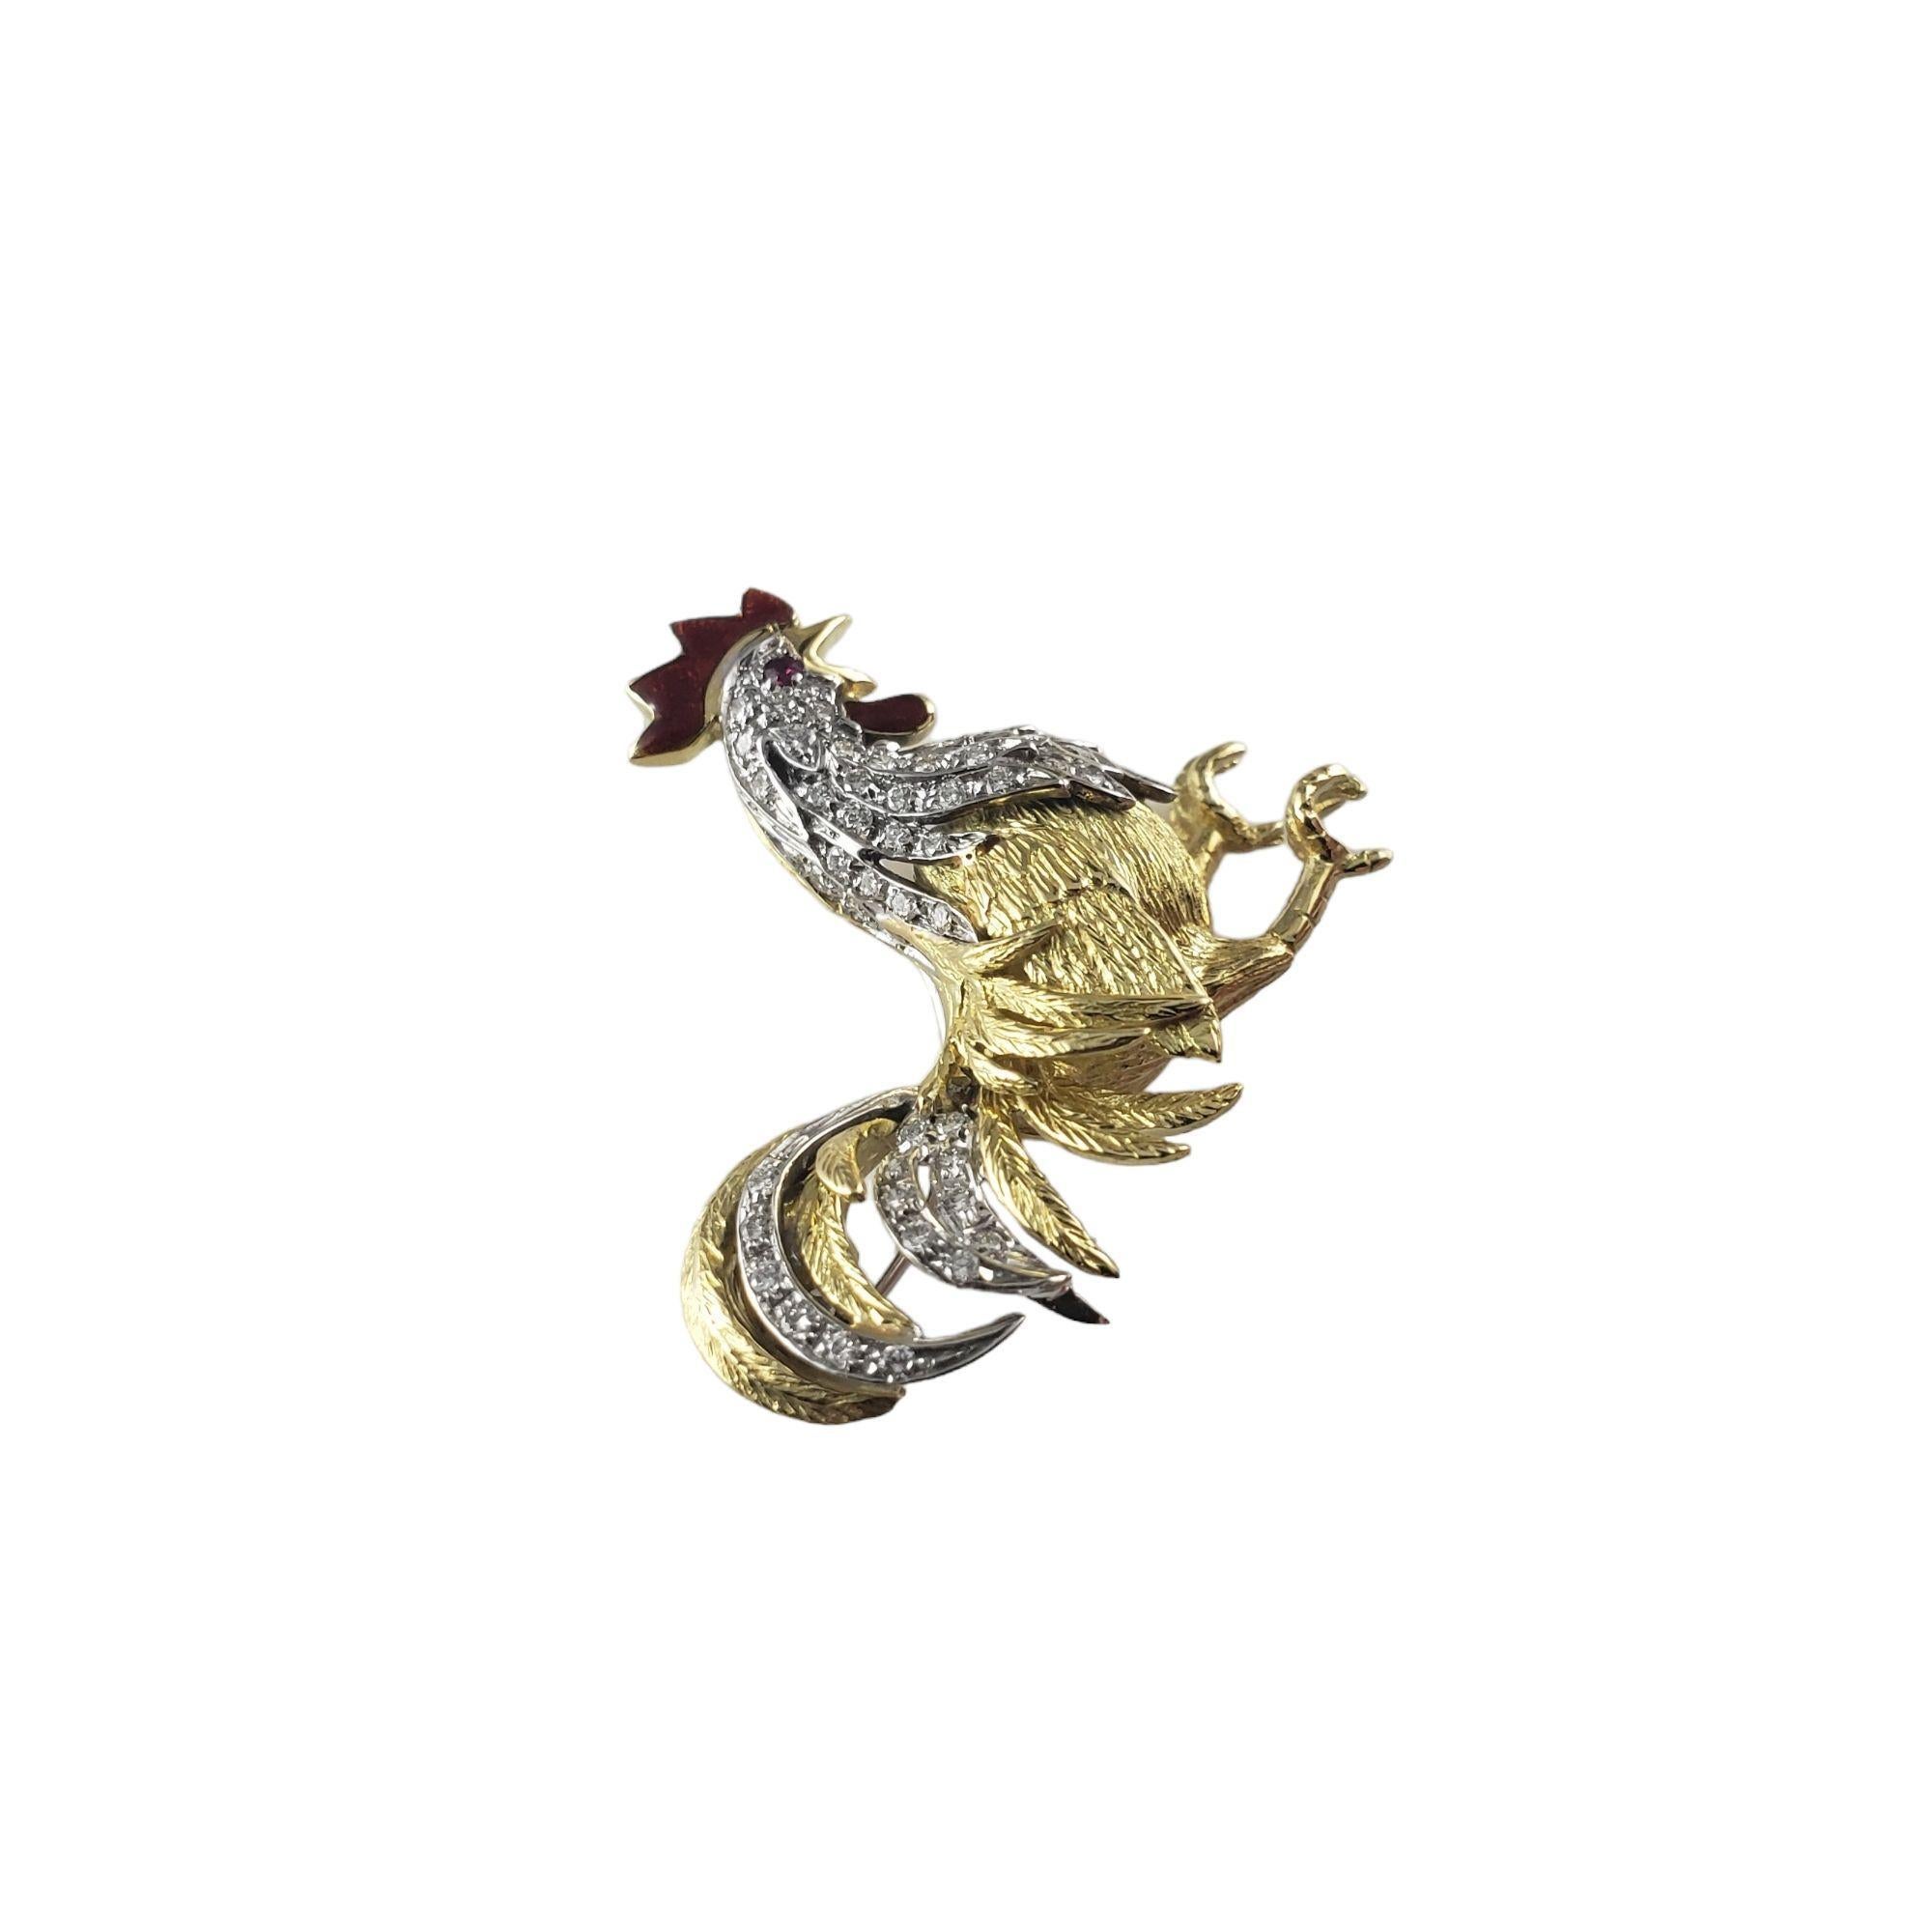 Brilliant Cut Garavelli 18 Karat Yellow Gold and Diamond Rooster Brooch/Pin #15008 For Sale